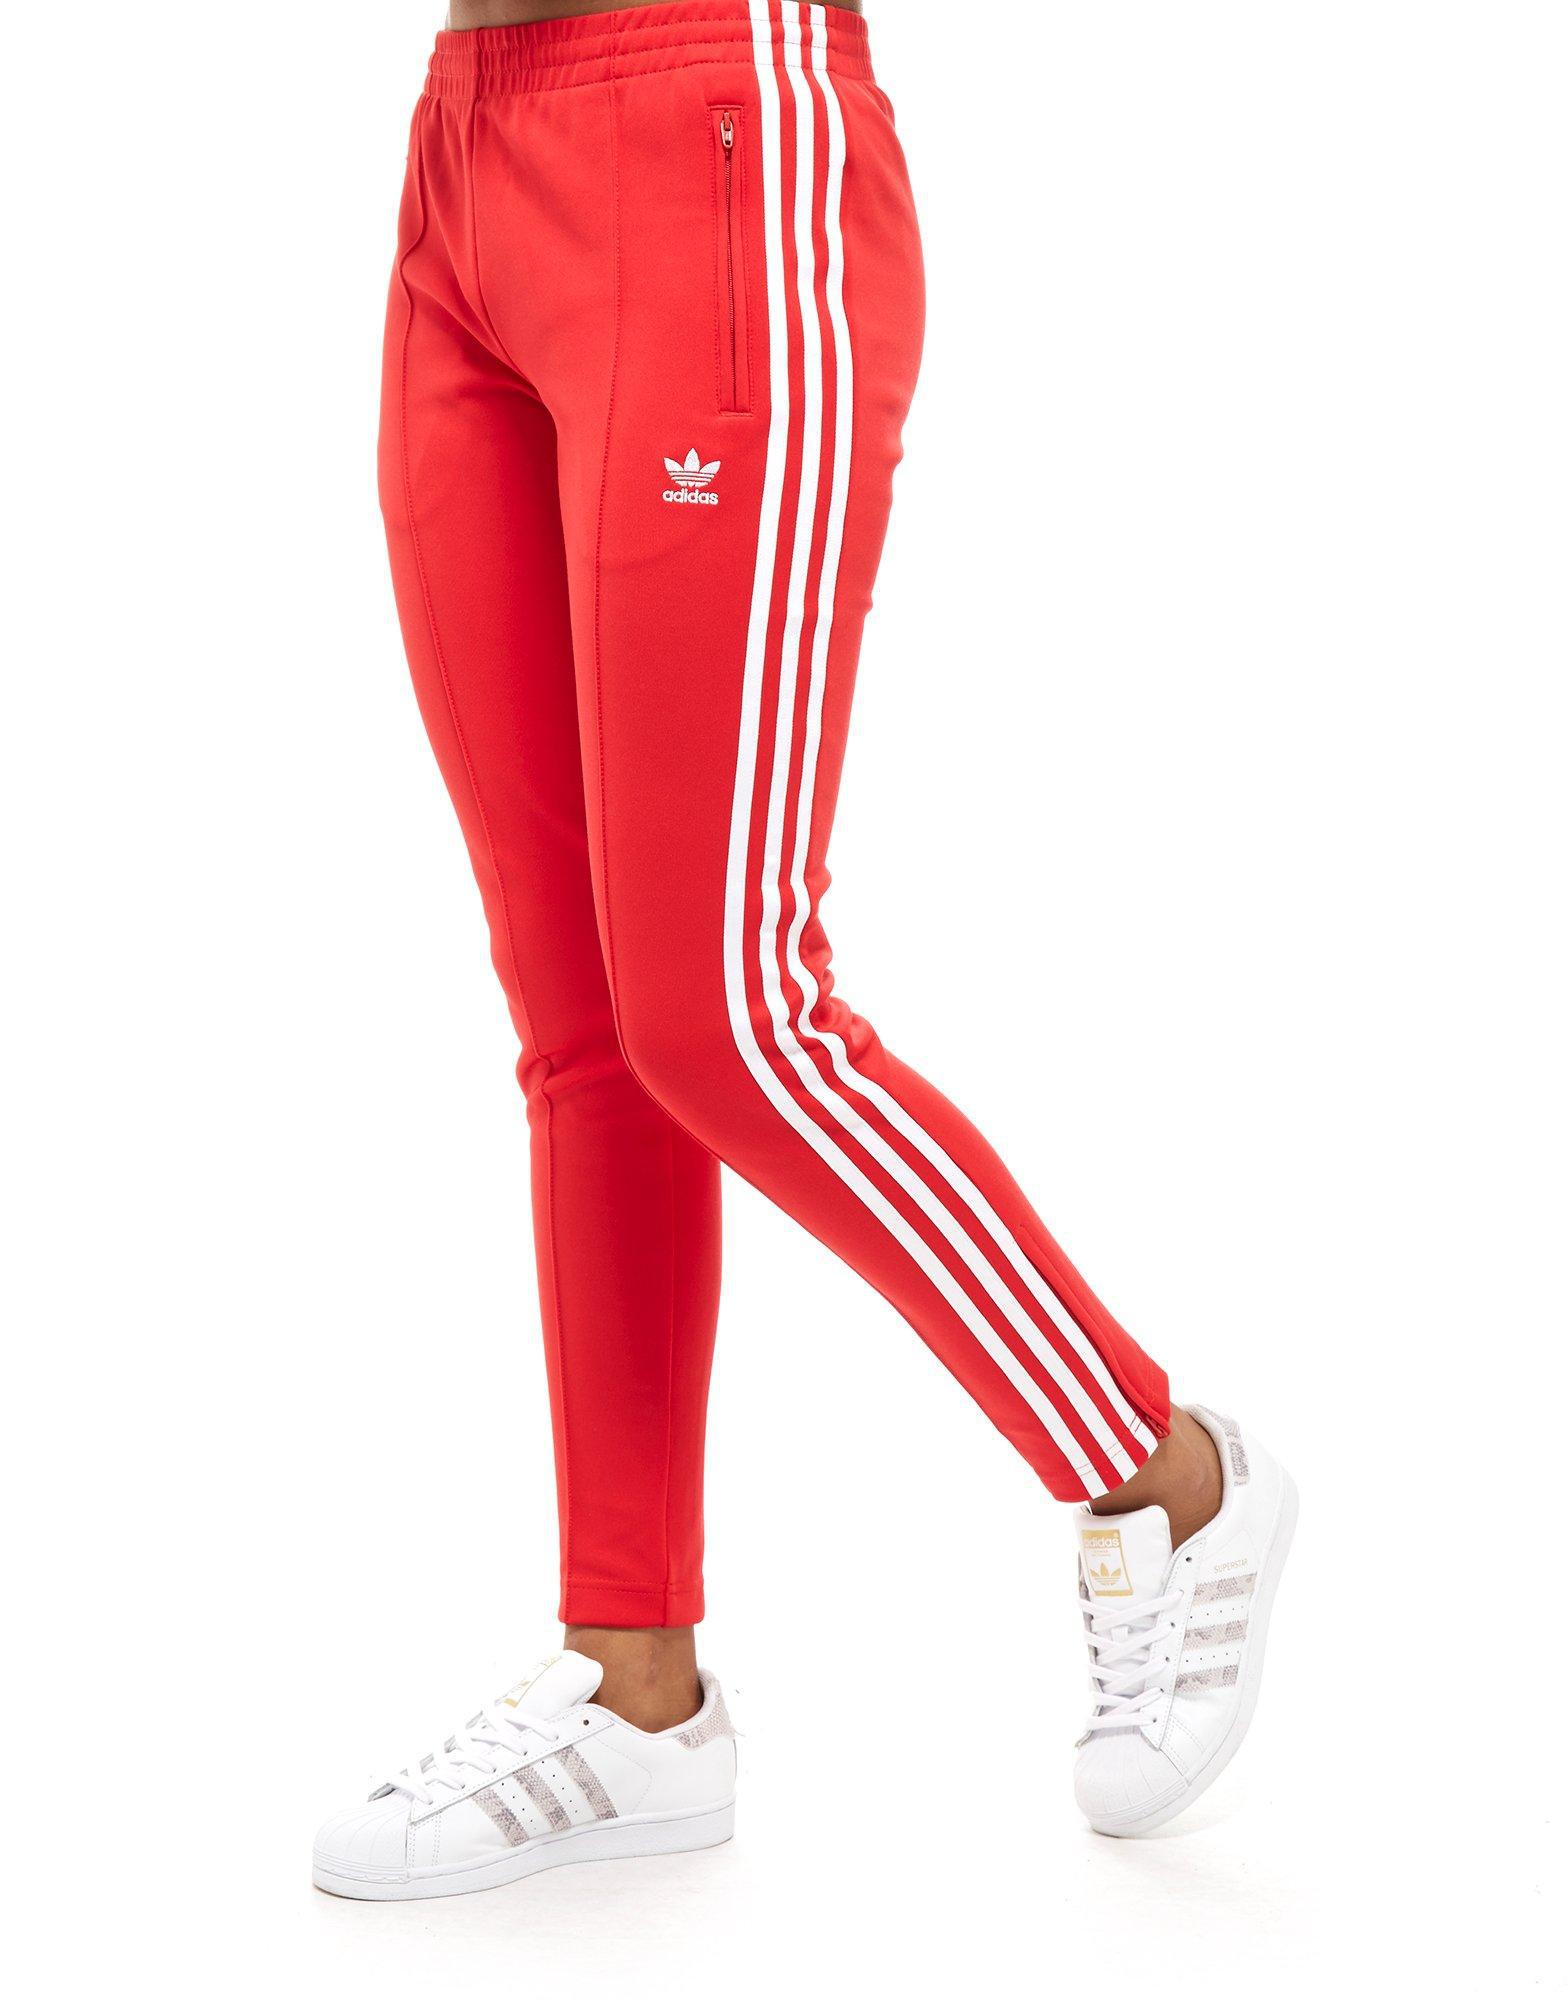 adidas superstar pants red